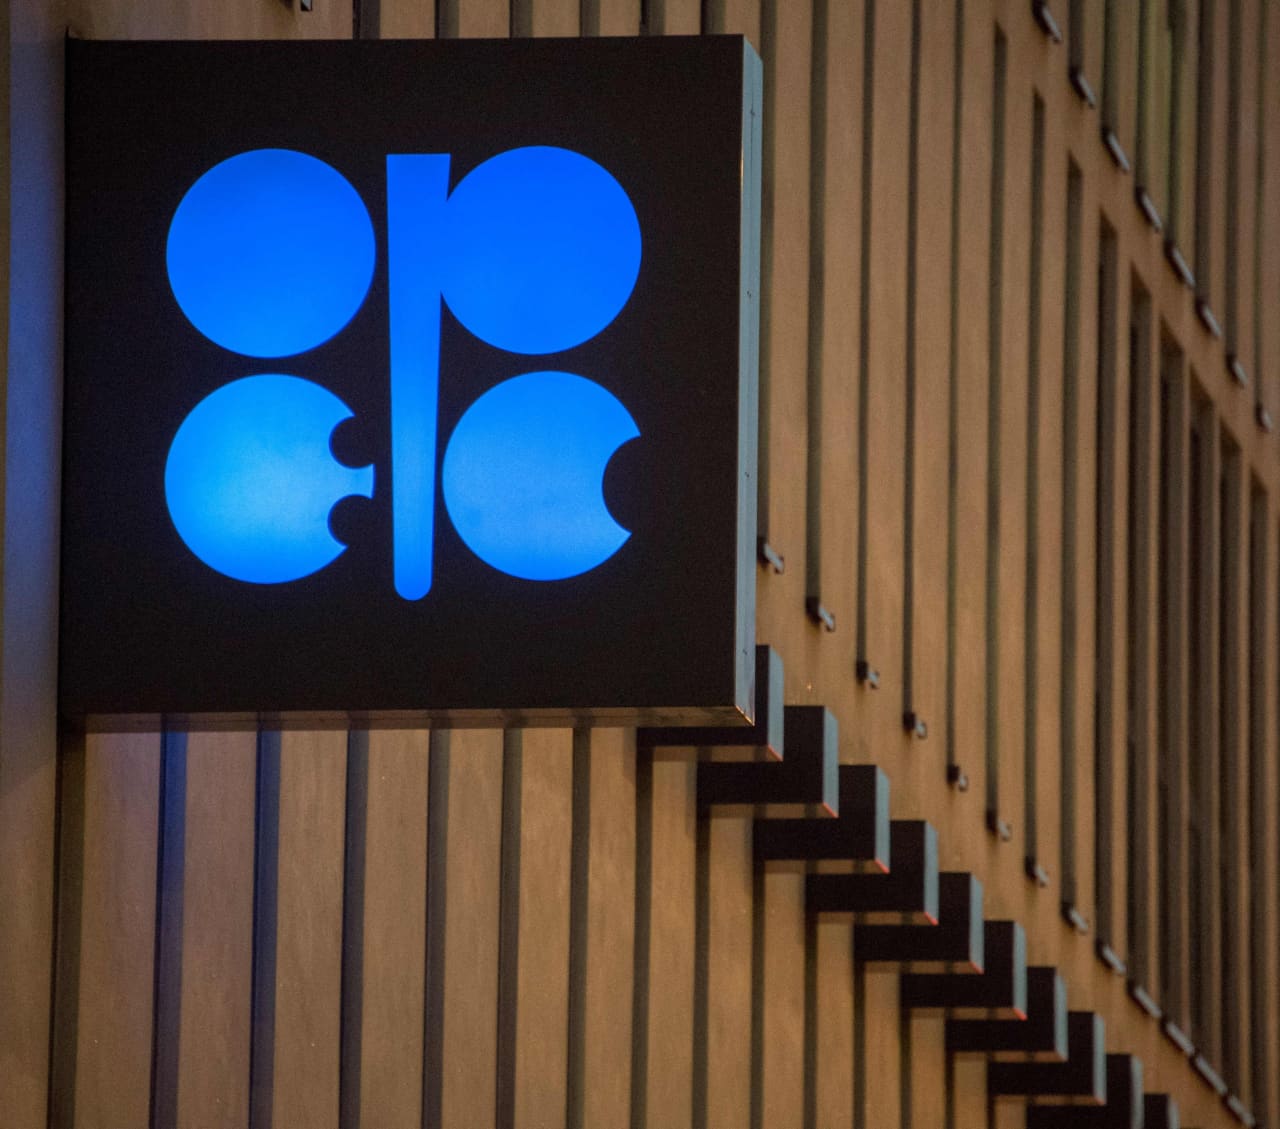 #Oil prices steady as traders await OPEC+ decision on production cuts